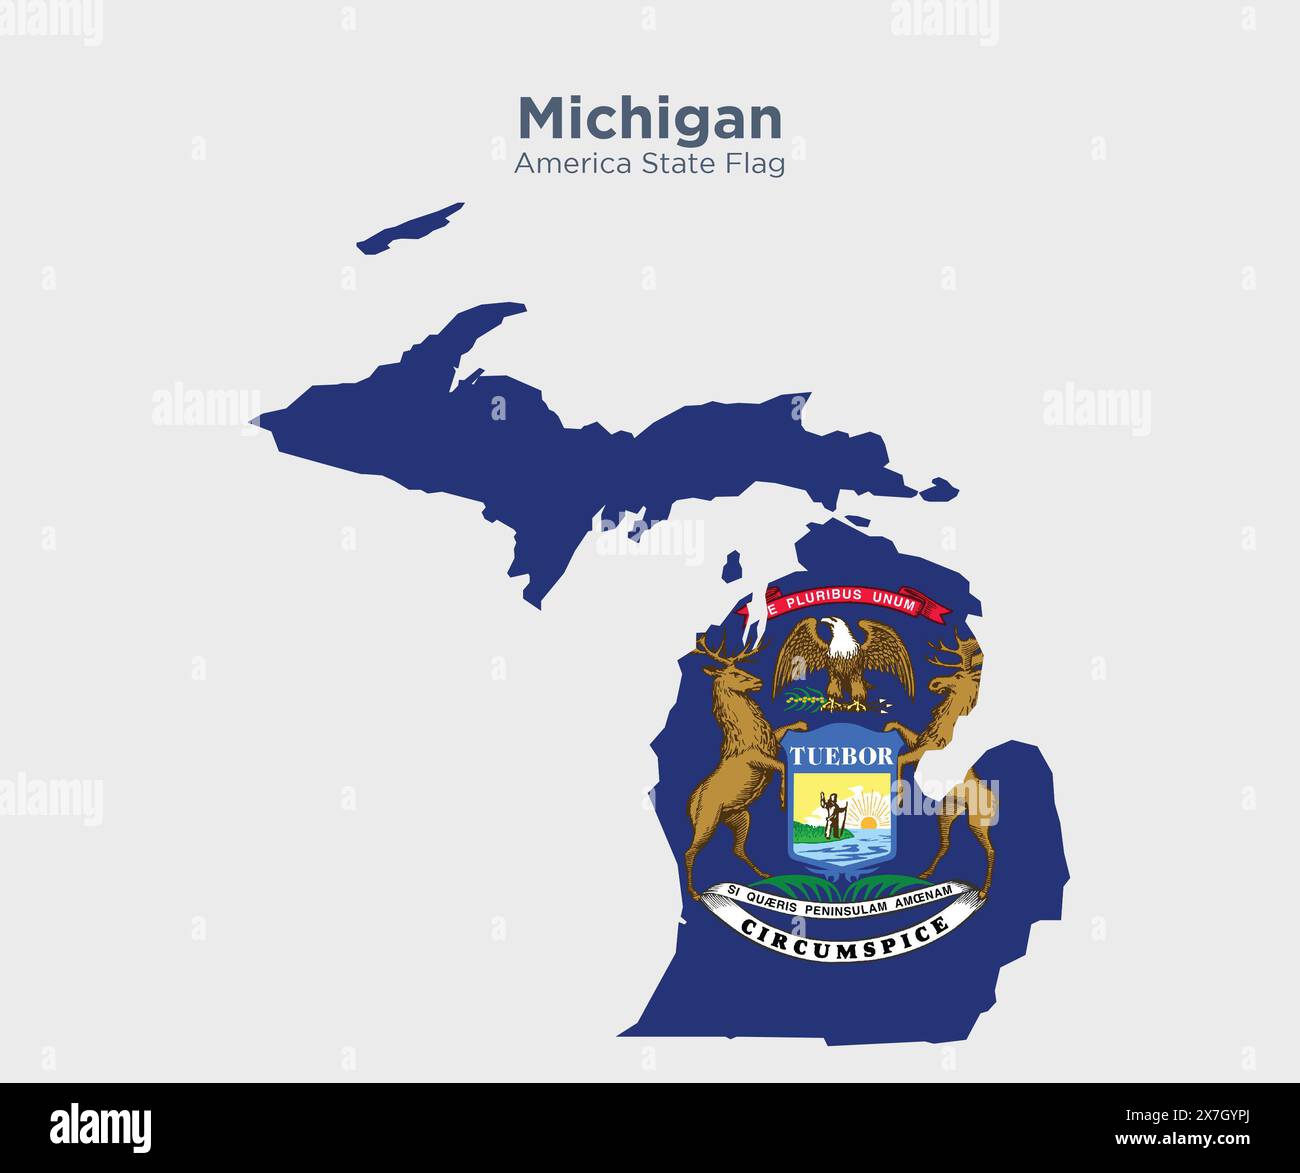 Michigan flag and map. Flags of the U.S. states and territories. America states flag and map on white background. Stock Photo